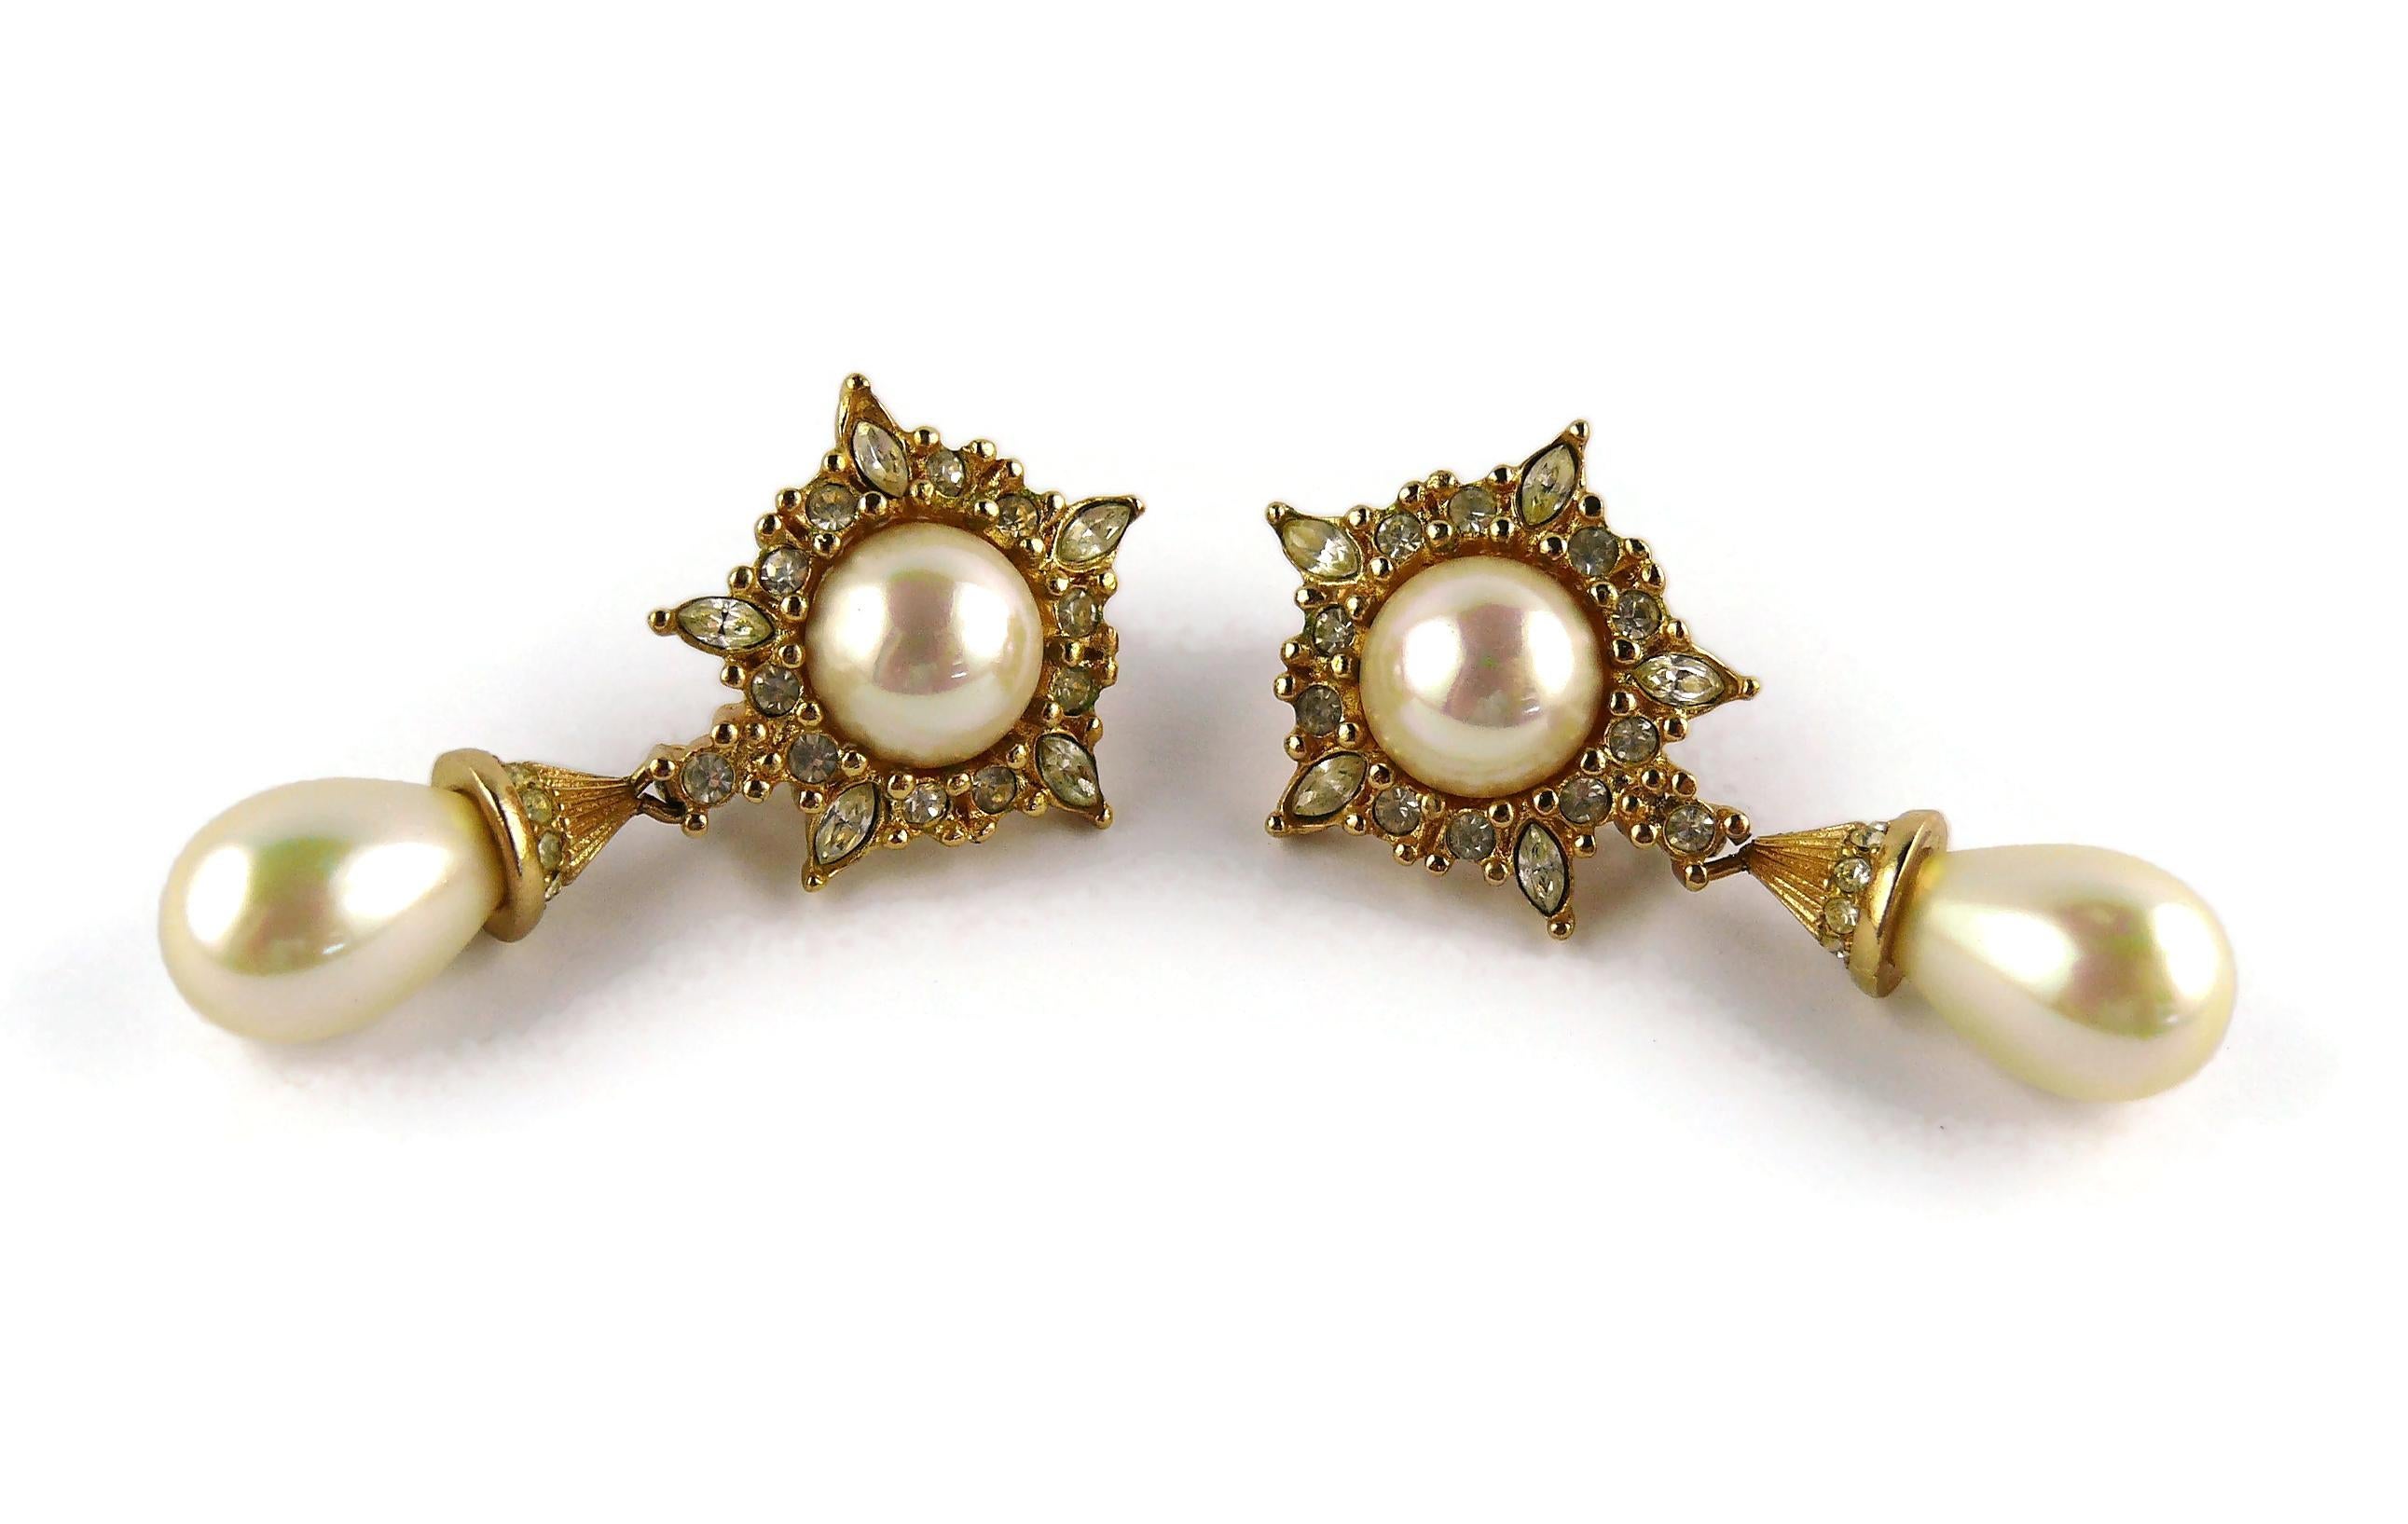 CHRISTIAN DIOR vintage dangling earrings (clip-on) featuring a pearl drop topped by a gold toned star embellished with clear crystals.

Embossed CHR. DIOR © Germany.

Indicative measurements : max. height approx. 4.2 cm (1.65 inches) / max. width